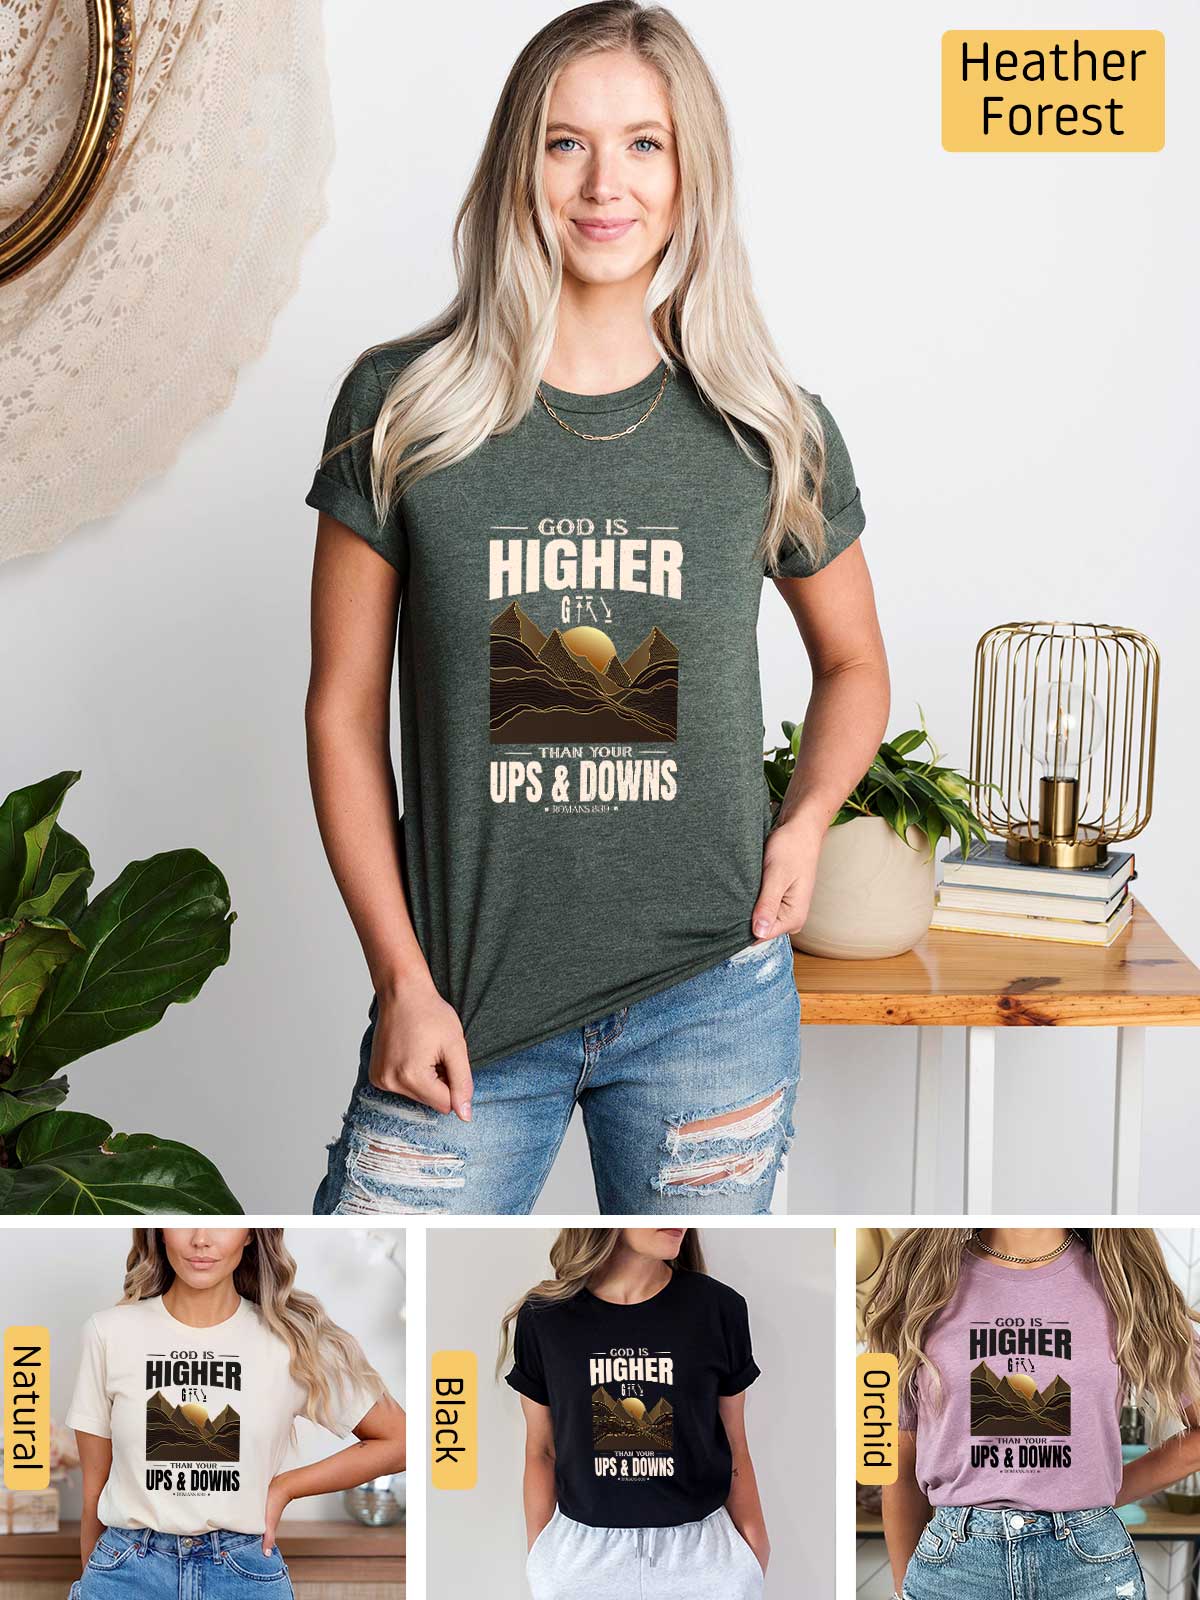 a woman wearing a t - shirt that says higher up a downs